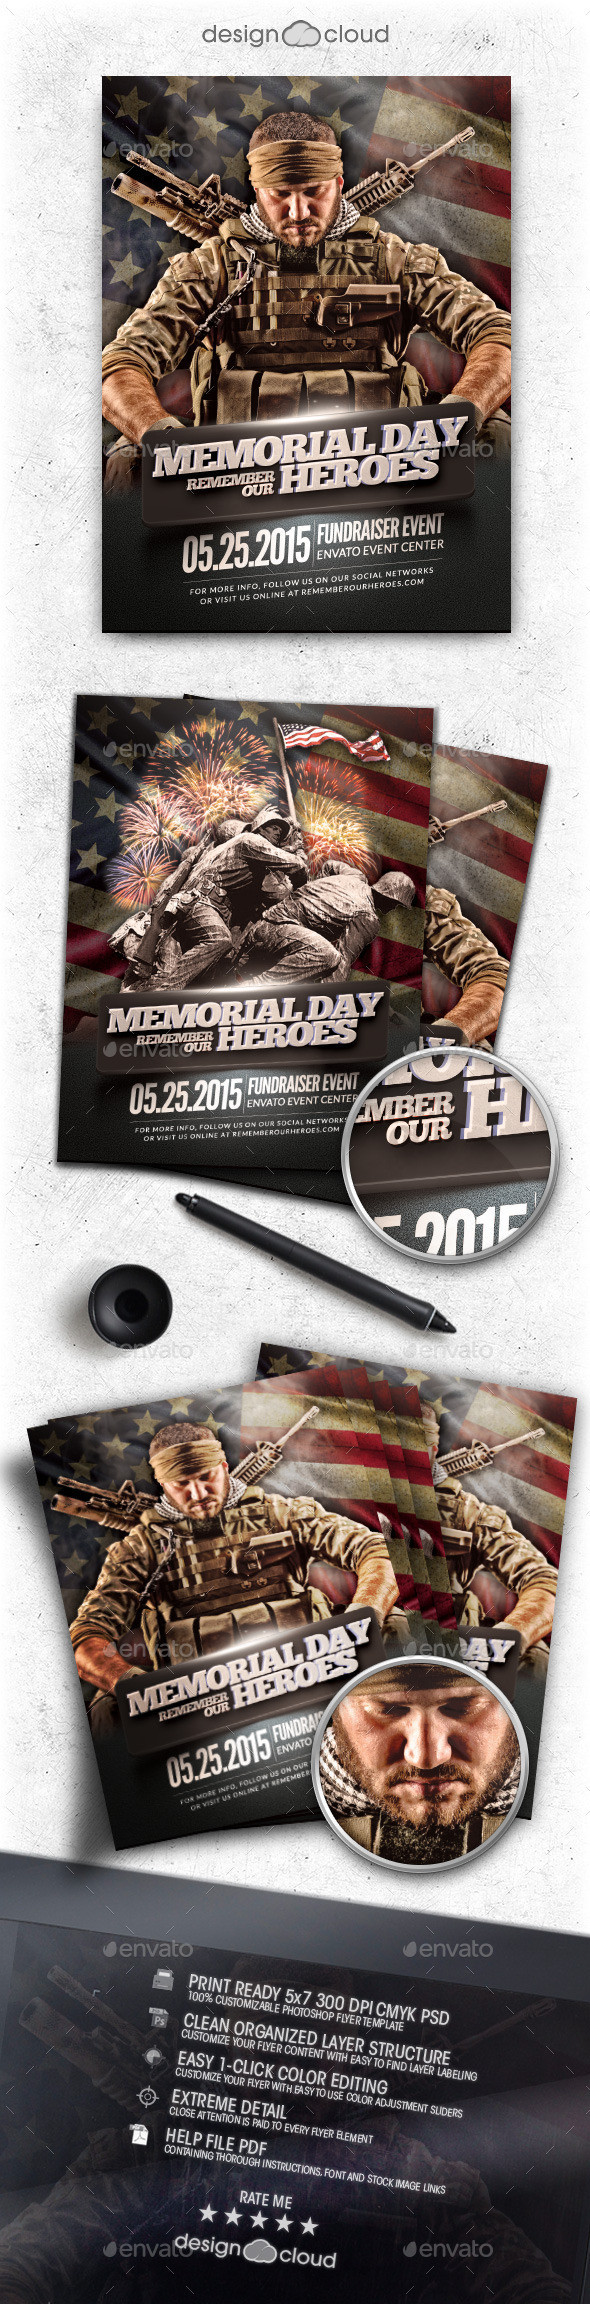 Preview memorial day remember event flyer template